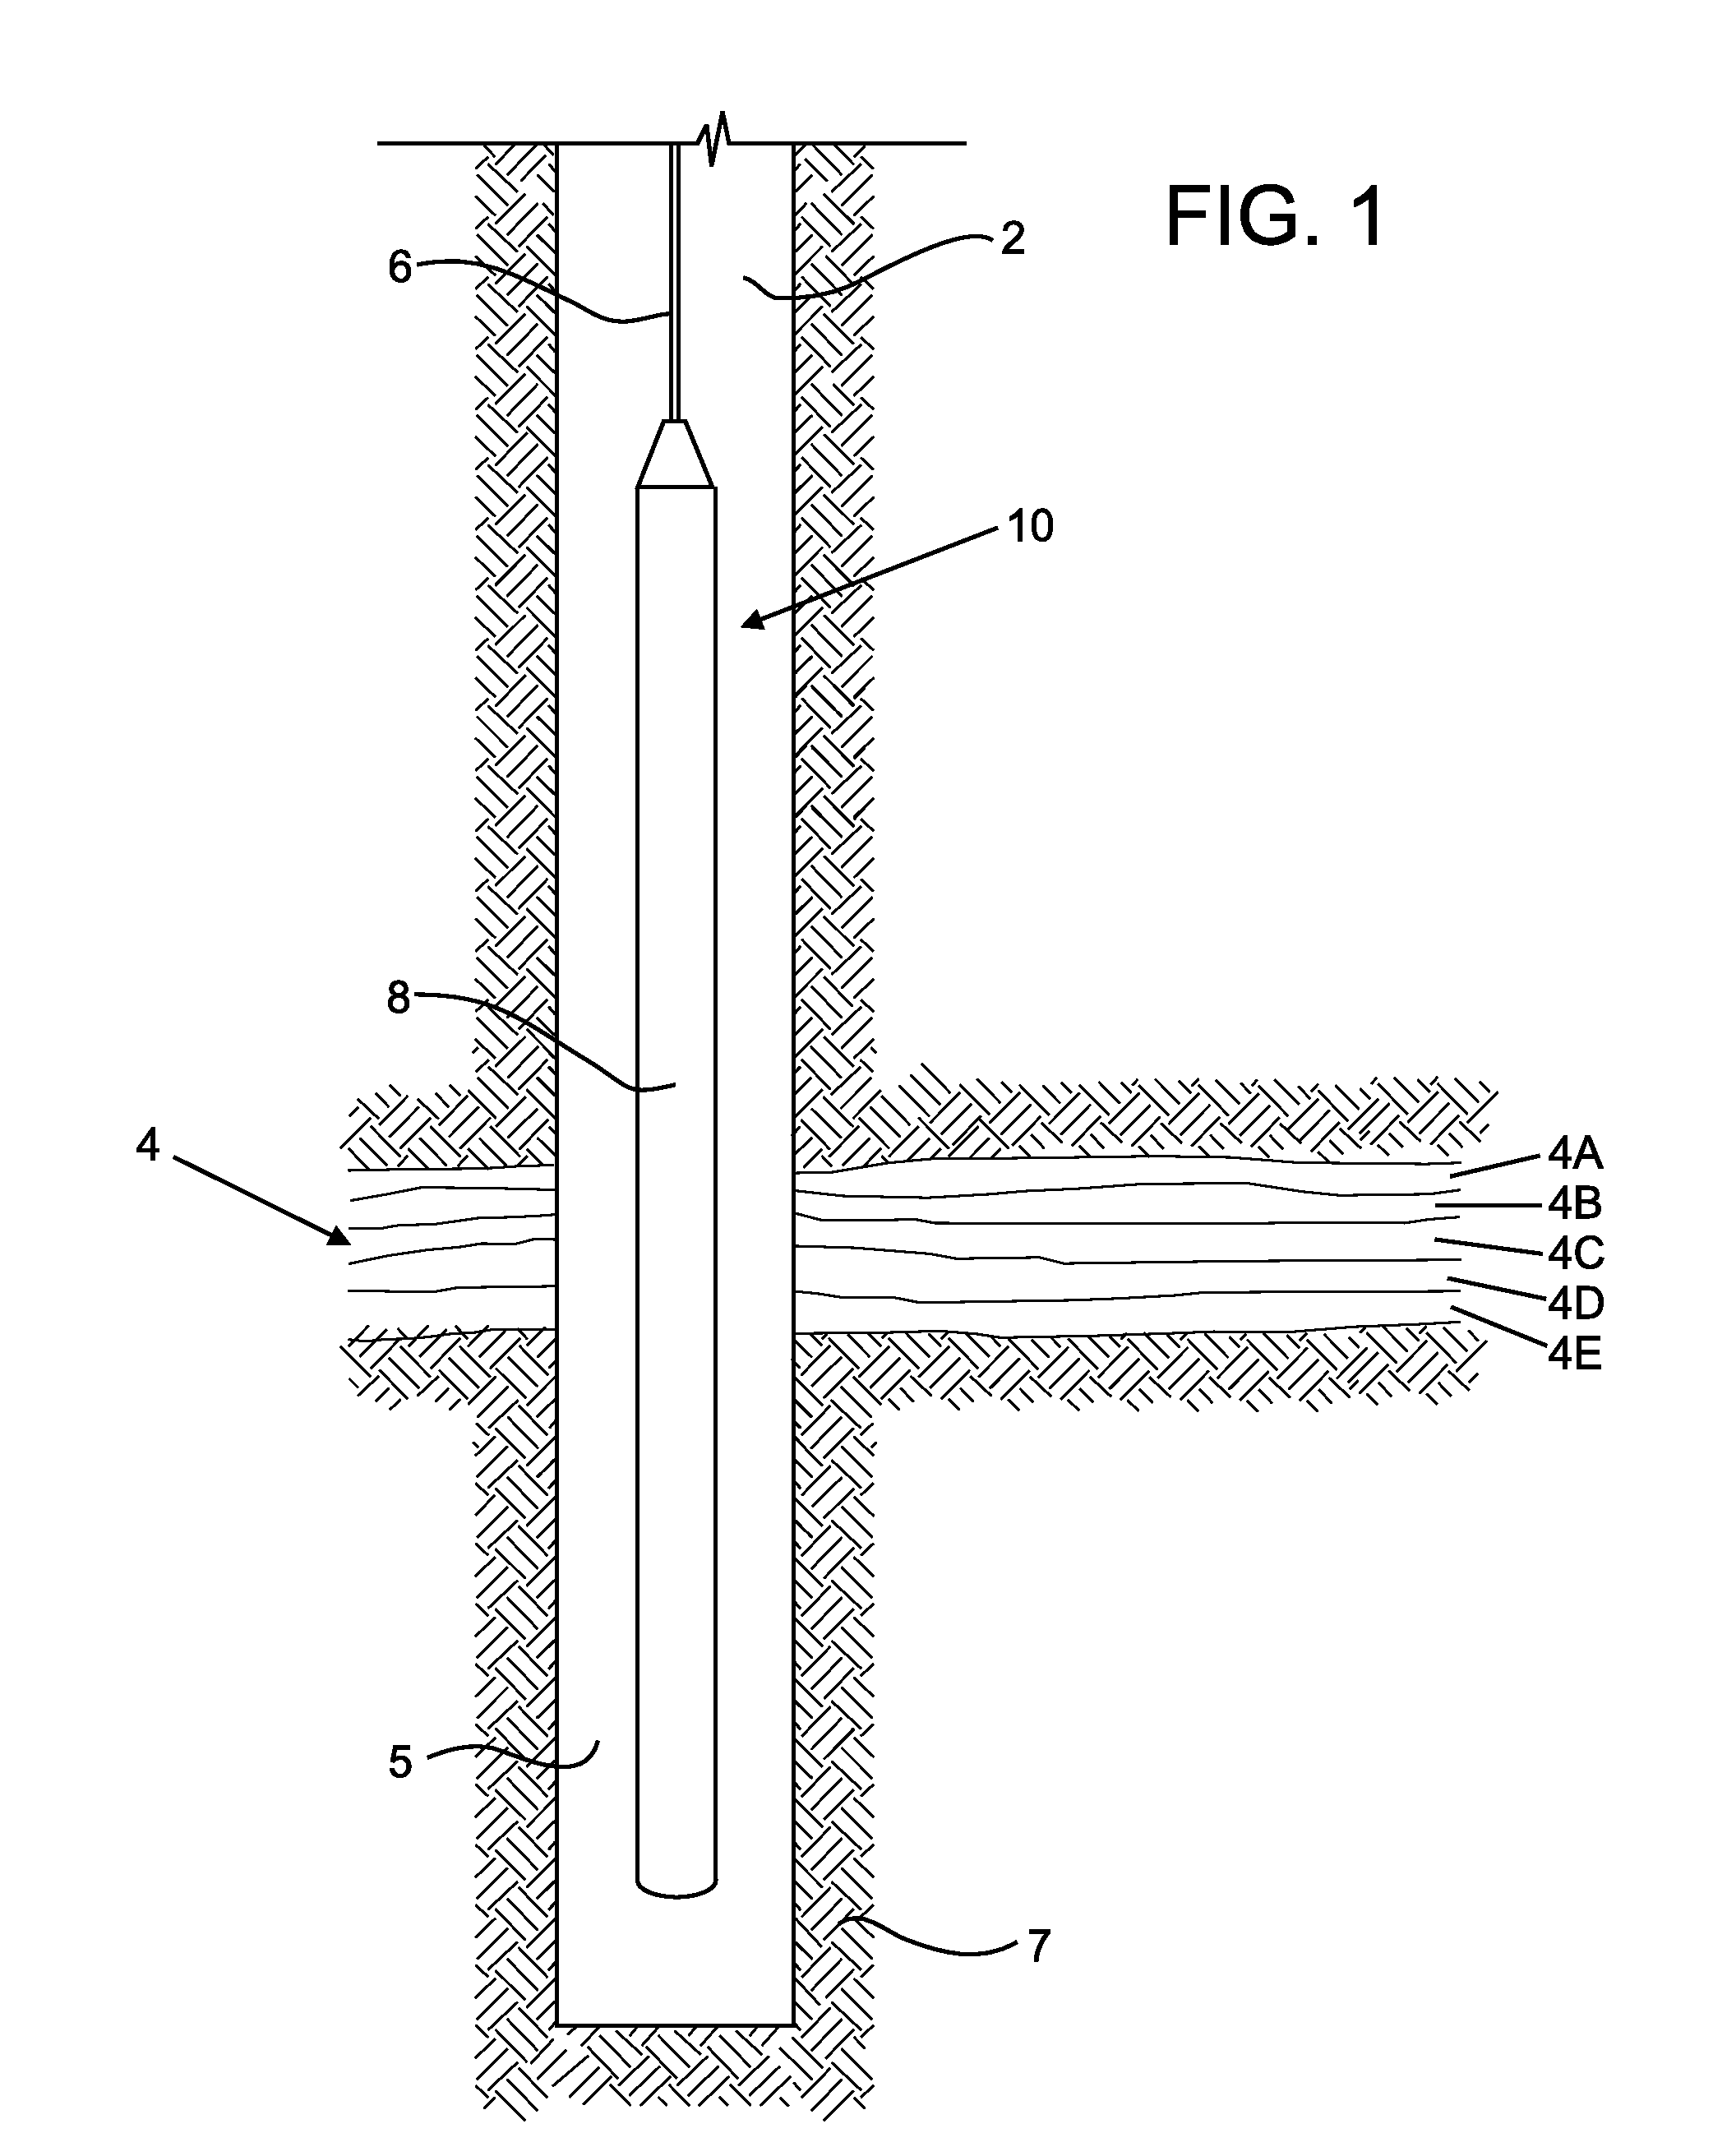 Source compensated formation density measurement method by using a pulsed neutron generator